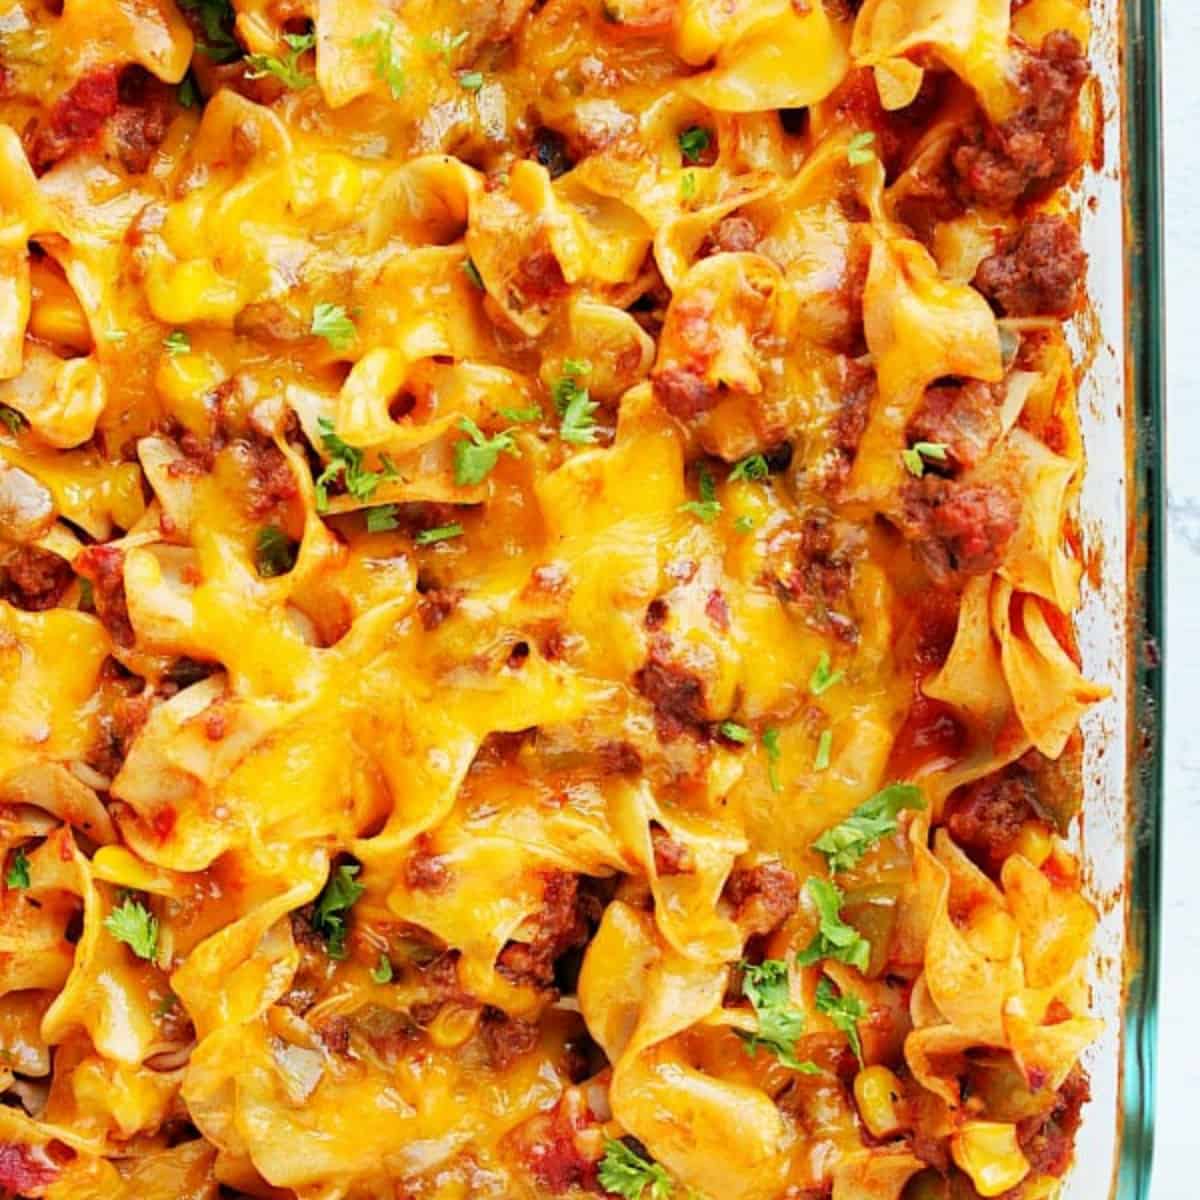 Beef noodle casserole in a baking dish.